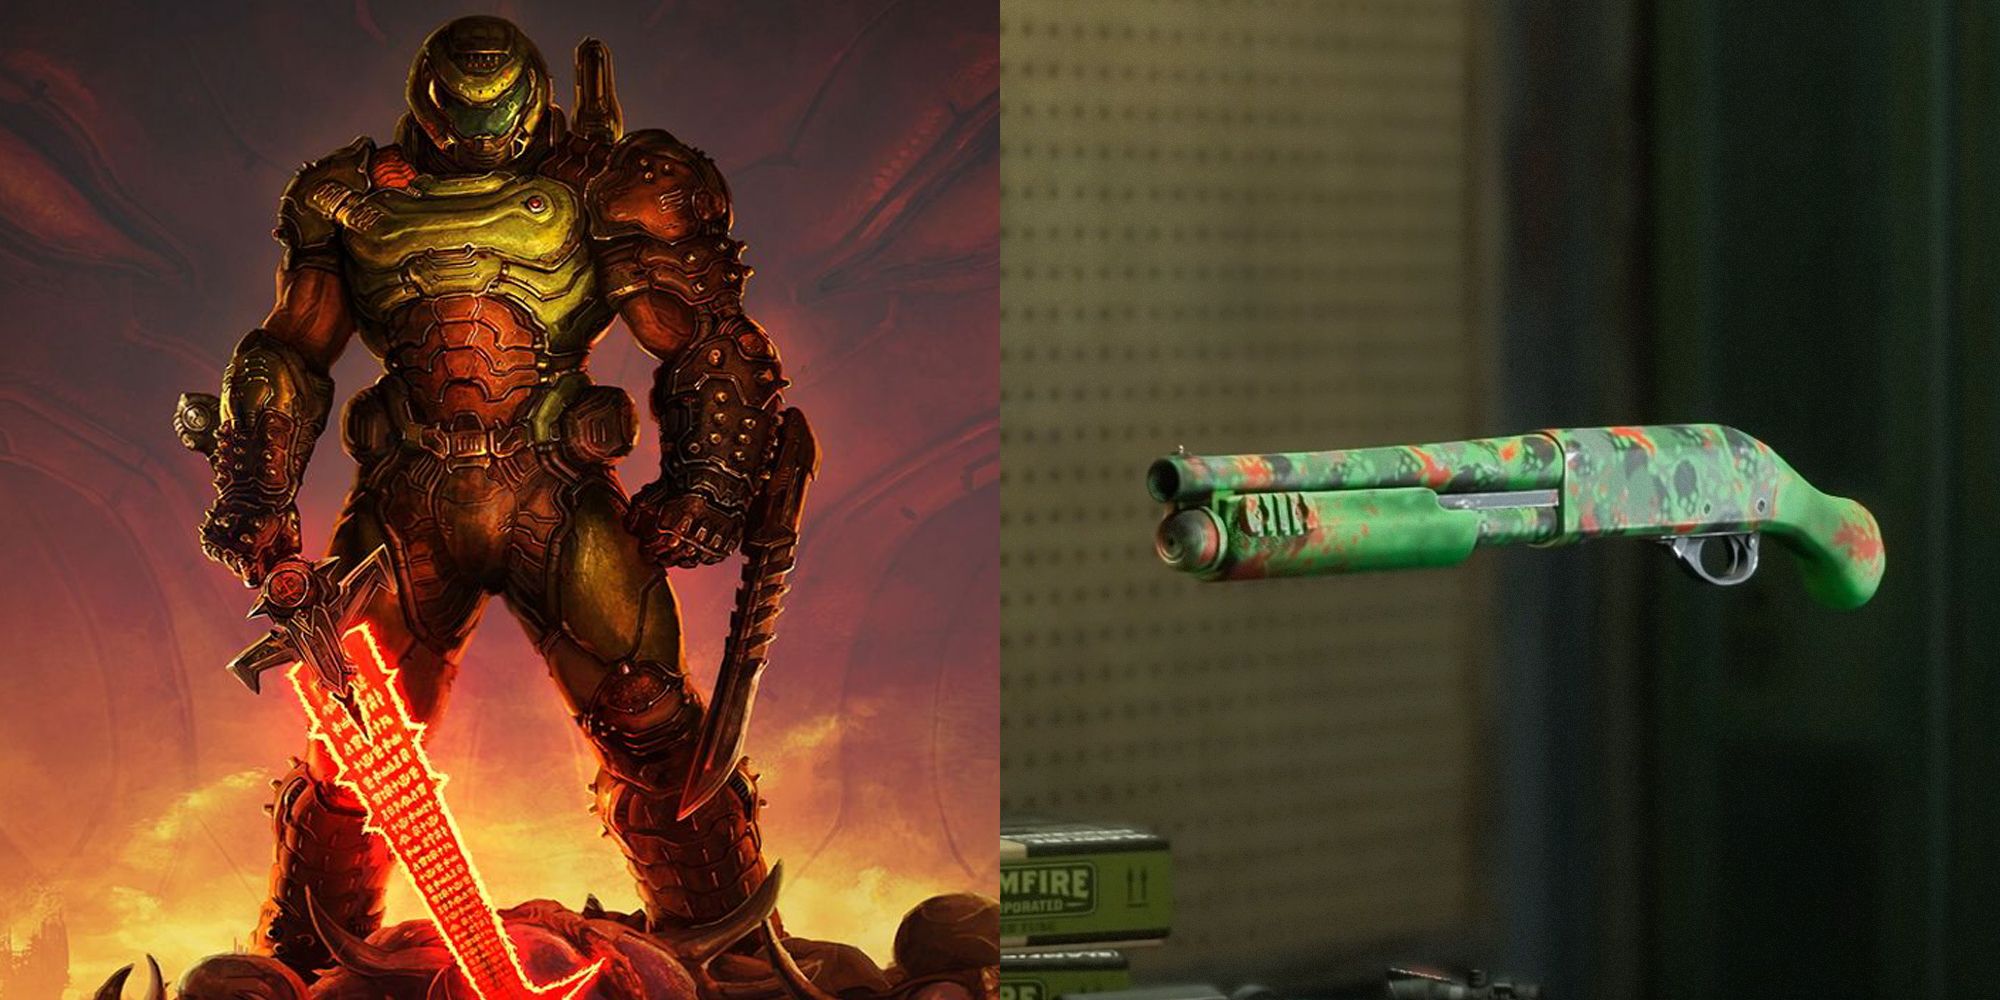 Split image with two photos. The left is Doomslayer from Doom Eternal. The right is a weapon skin from Back 4 Blood.